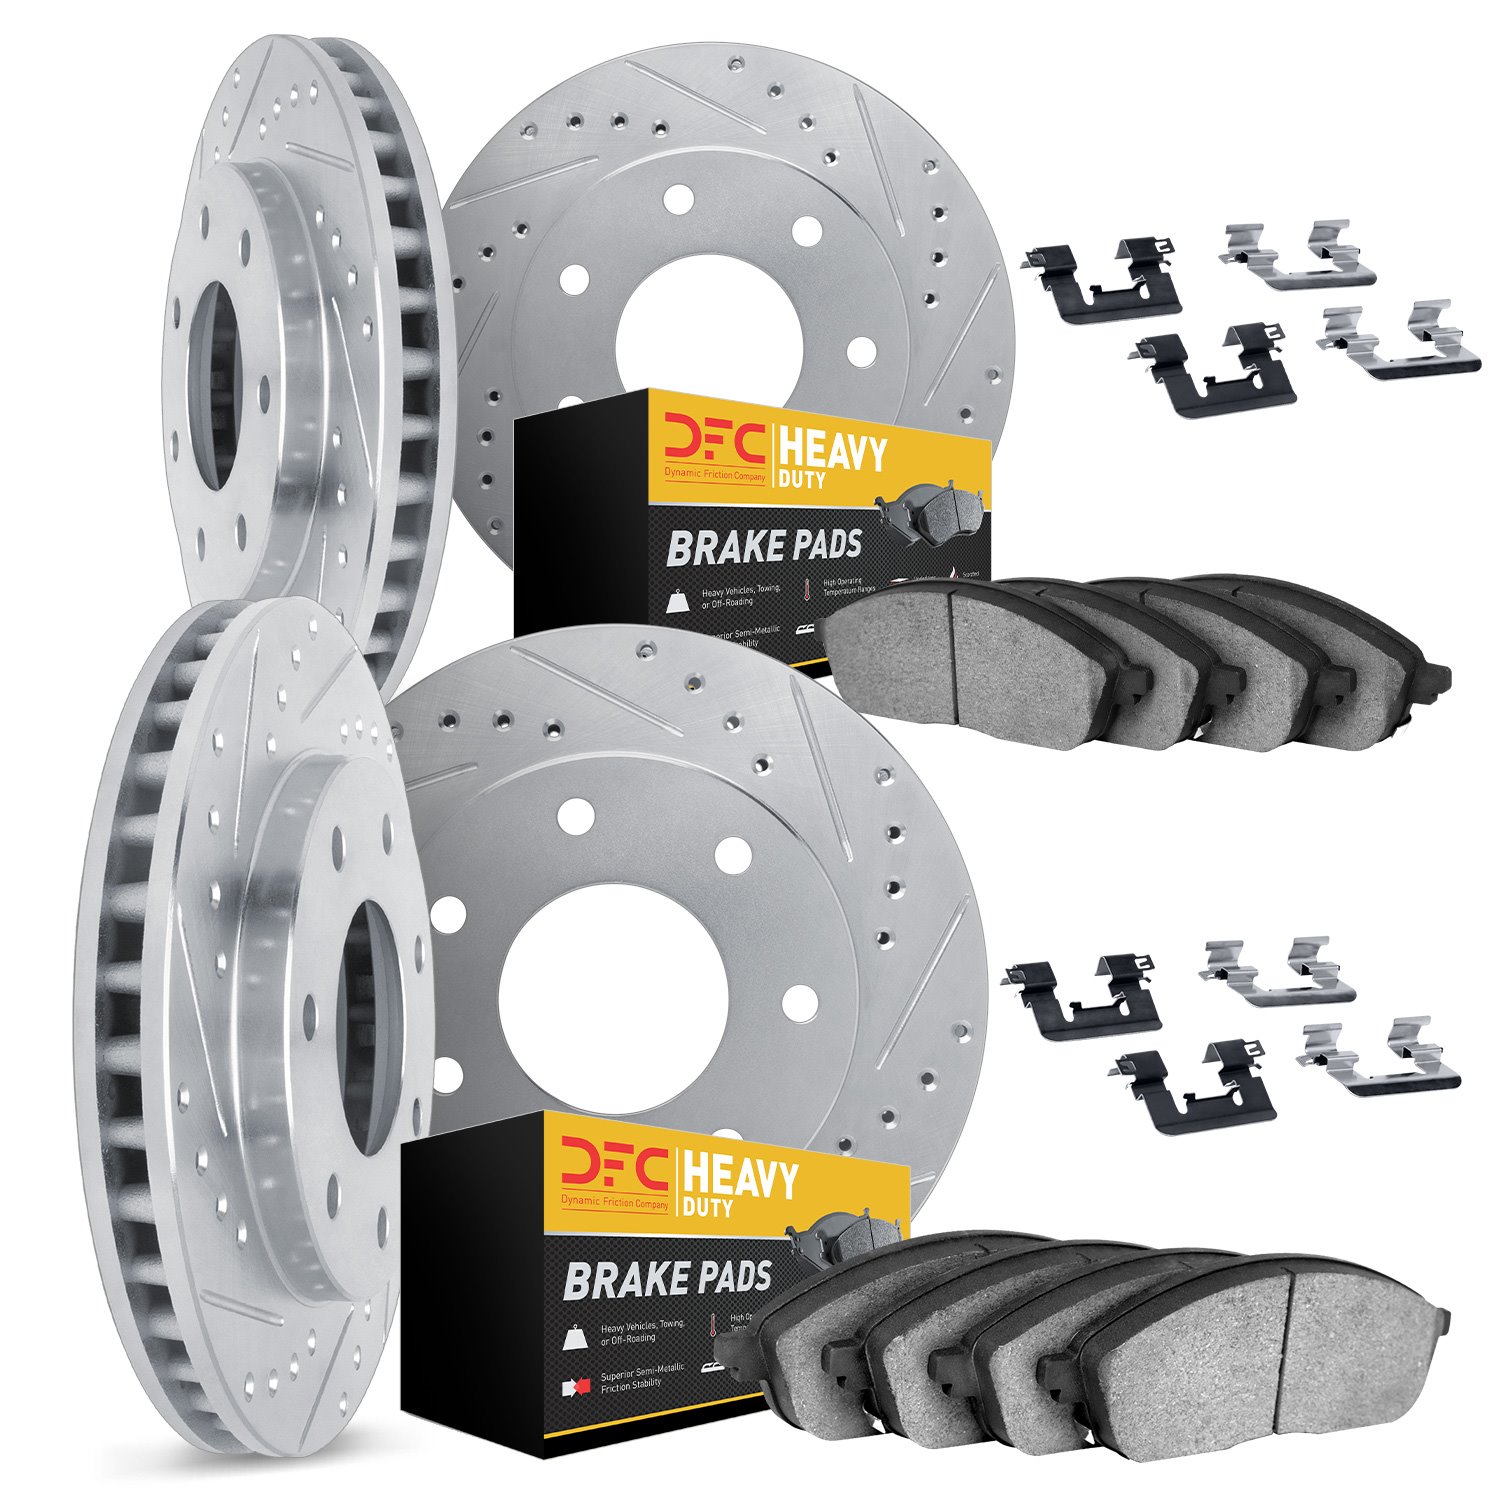 7214-54064 Drilled/Slotted Rotors w/Heavy-Duty Brake Pads Kit & Hardware [Silver], 2004-2008 Ford/Lincoln/Mercury/Mazda, Positio